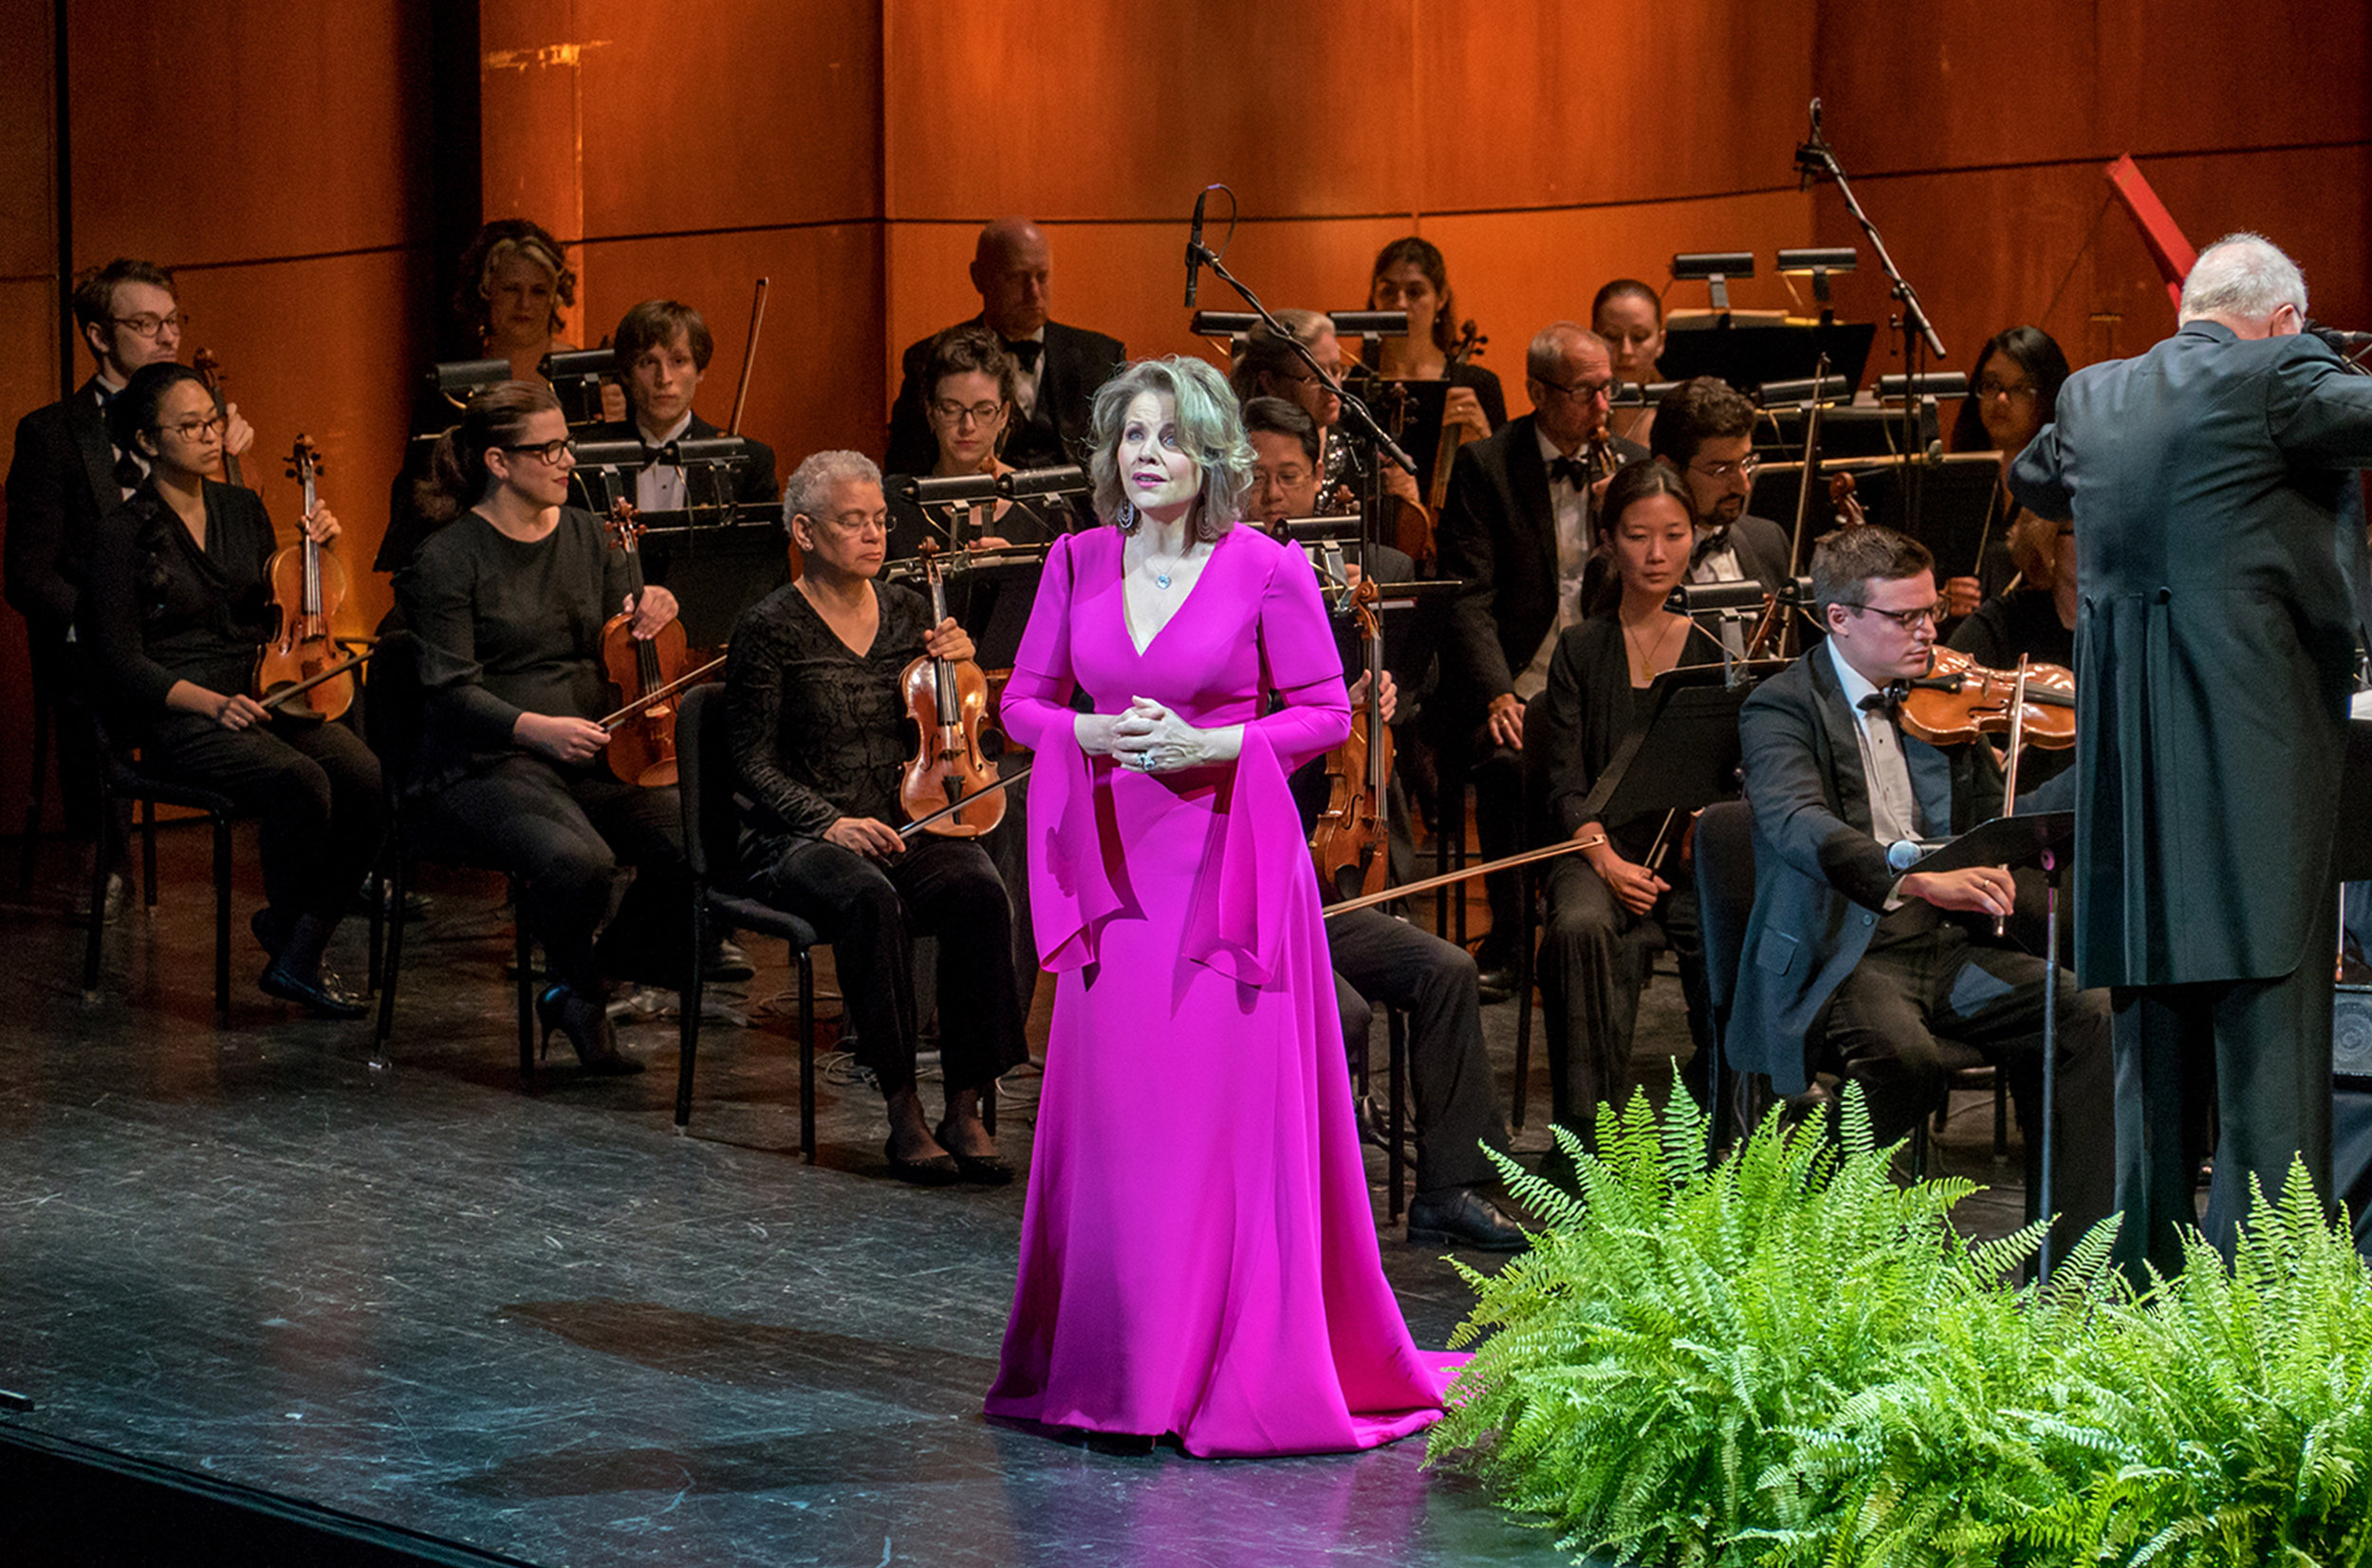 AN EVENING WITH RENEE FLEMING